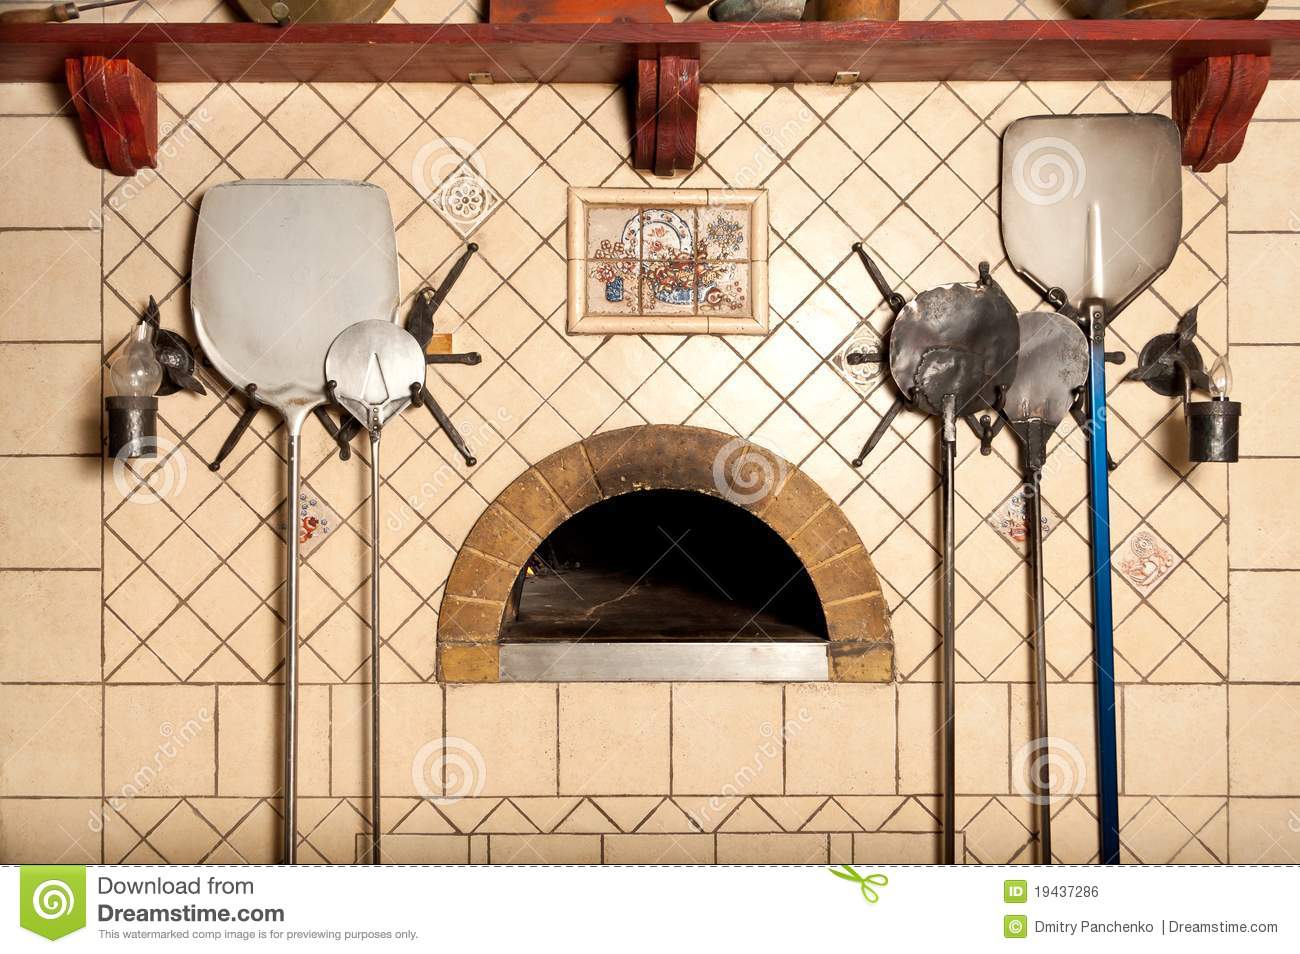 Wood Fired Pizza Oven Royalty Free Stock Image   Image  19437286